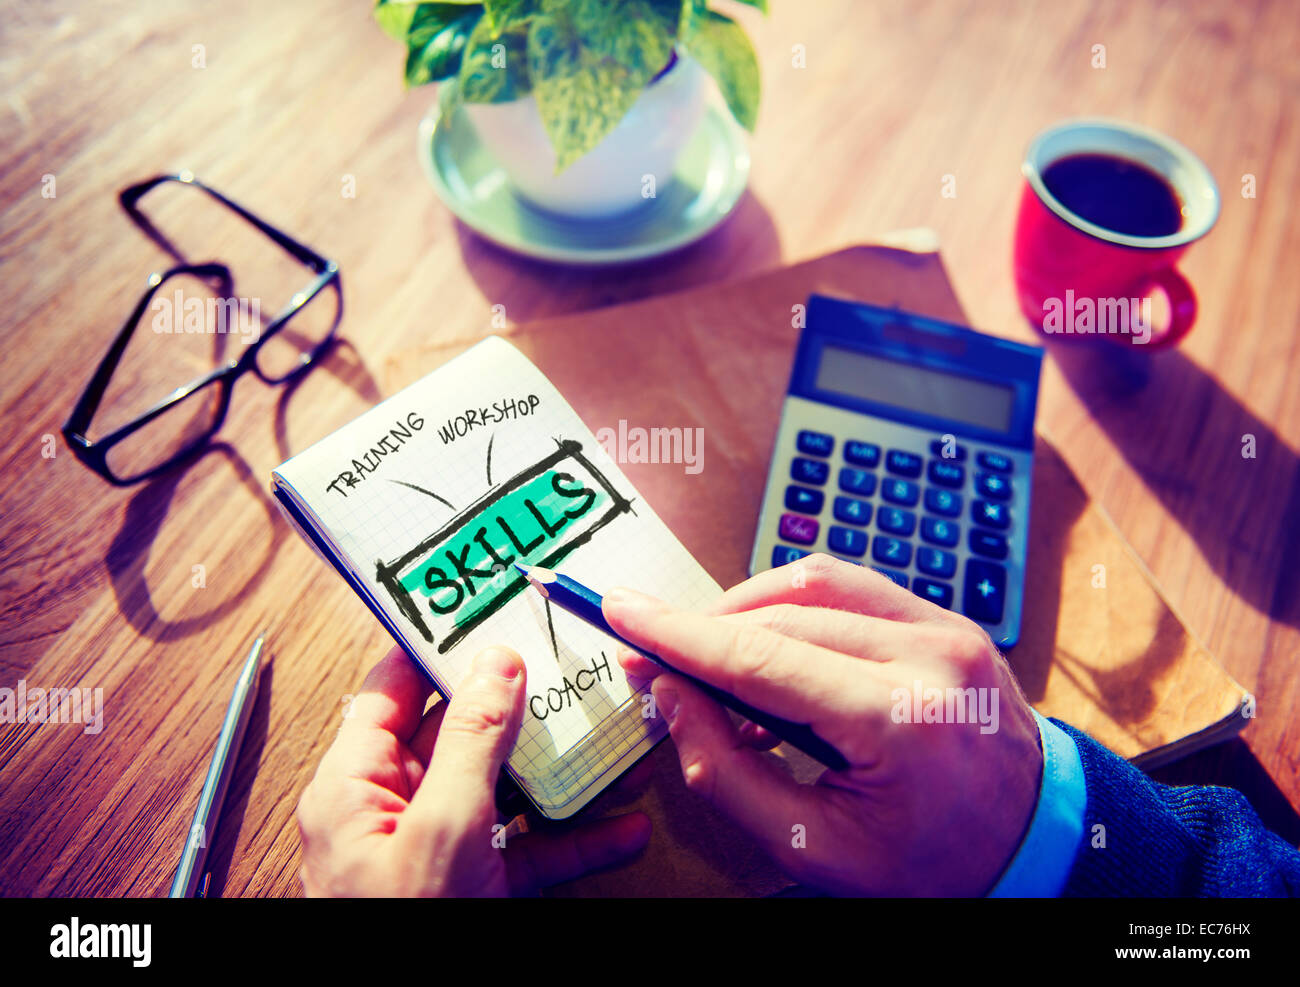 Skills Expertise Ability Capabilities Office Working Accounting Concept Stock Photo